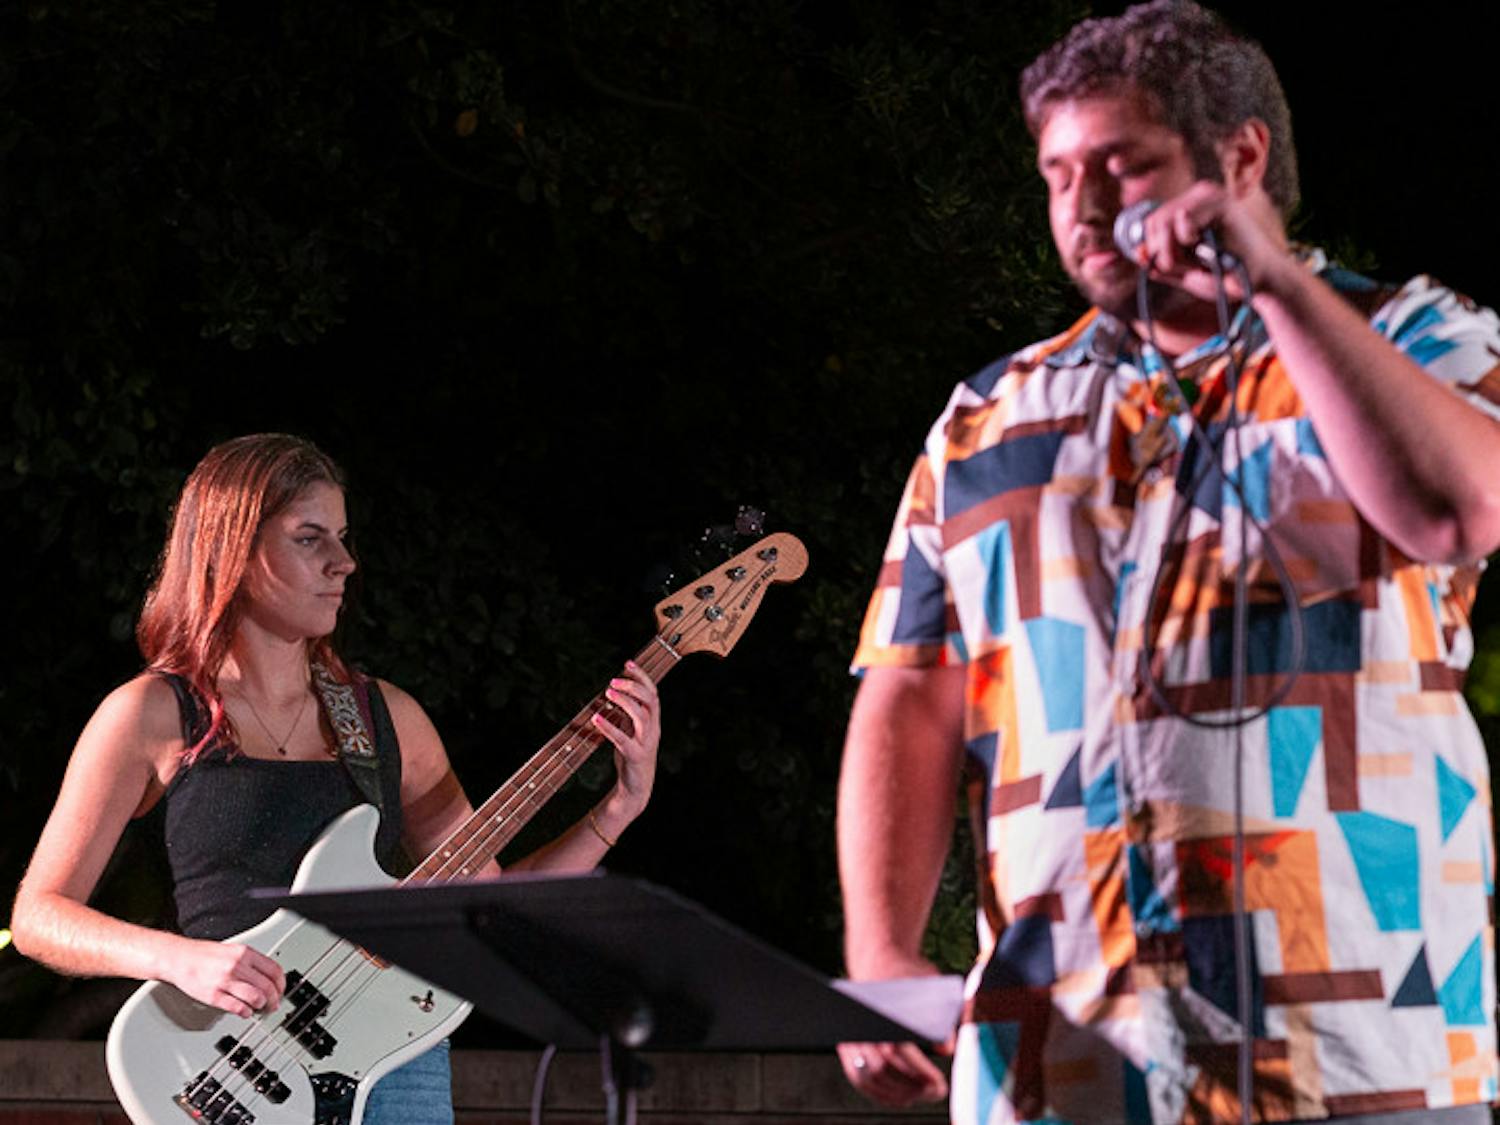 The House Band's bassist, fourth-year mathematics student Madison Adams (left), and lead singer, third-year international business and finance student Tyler Bomse (on right) perform at the battle of the bands on Oct. 5, 2022. The House Band won the competition and will be performing at the UofSC Homecoming Block Party on Oct. 5, 2022.